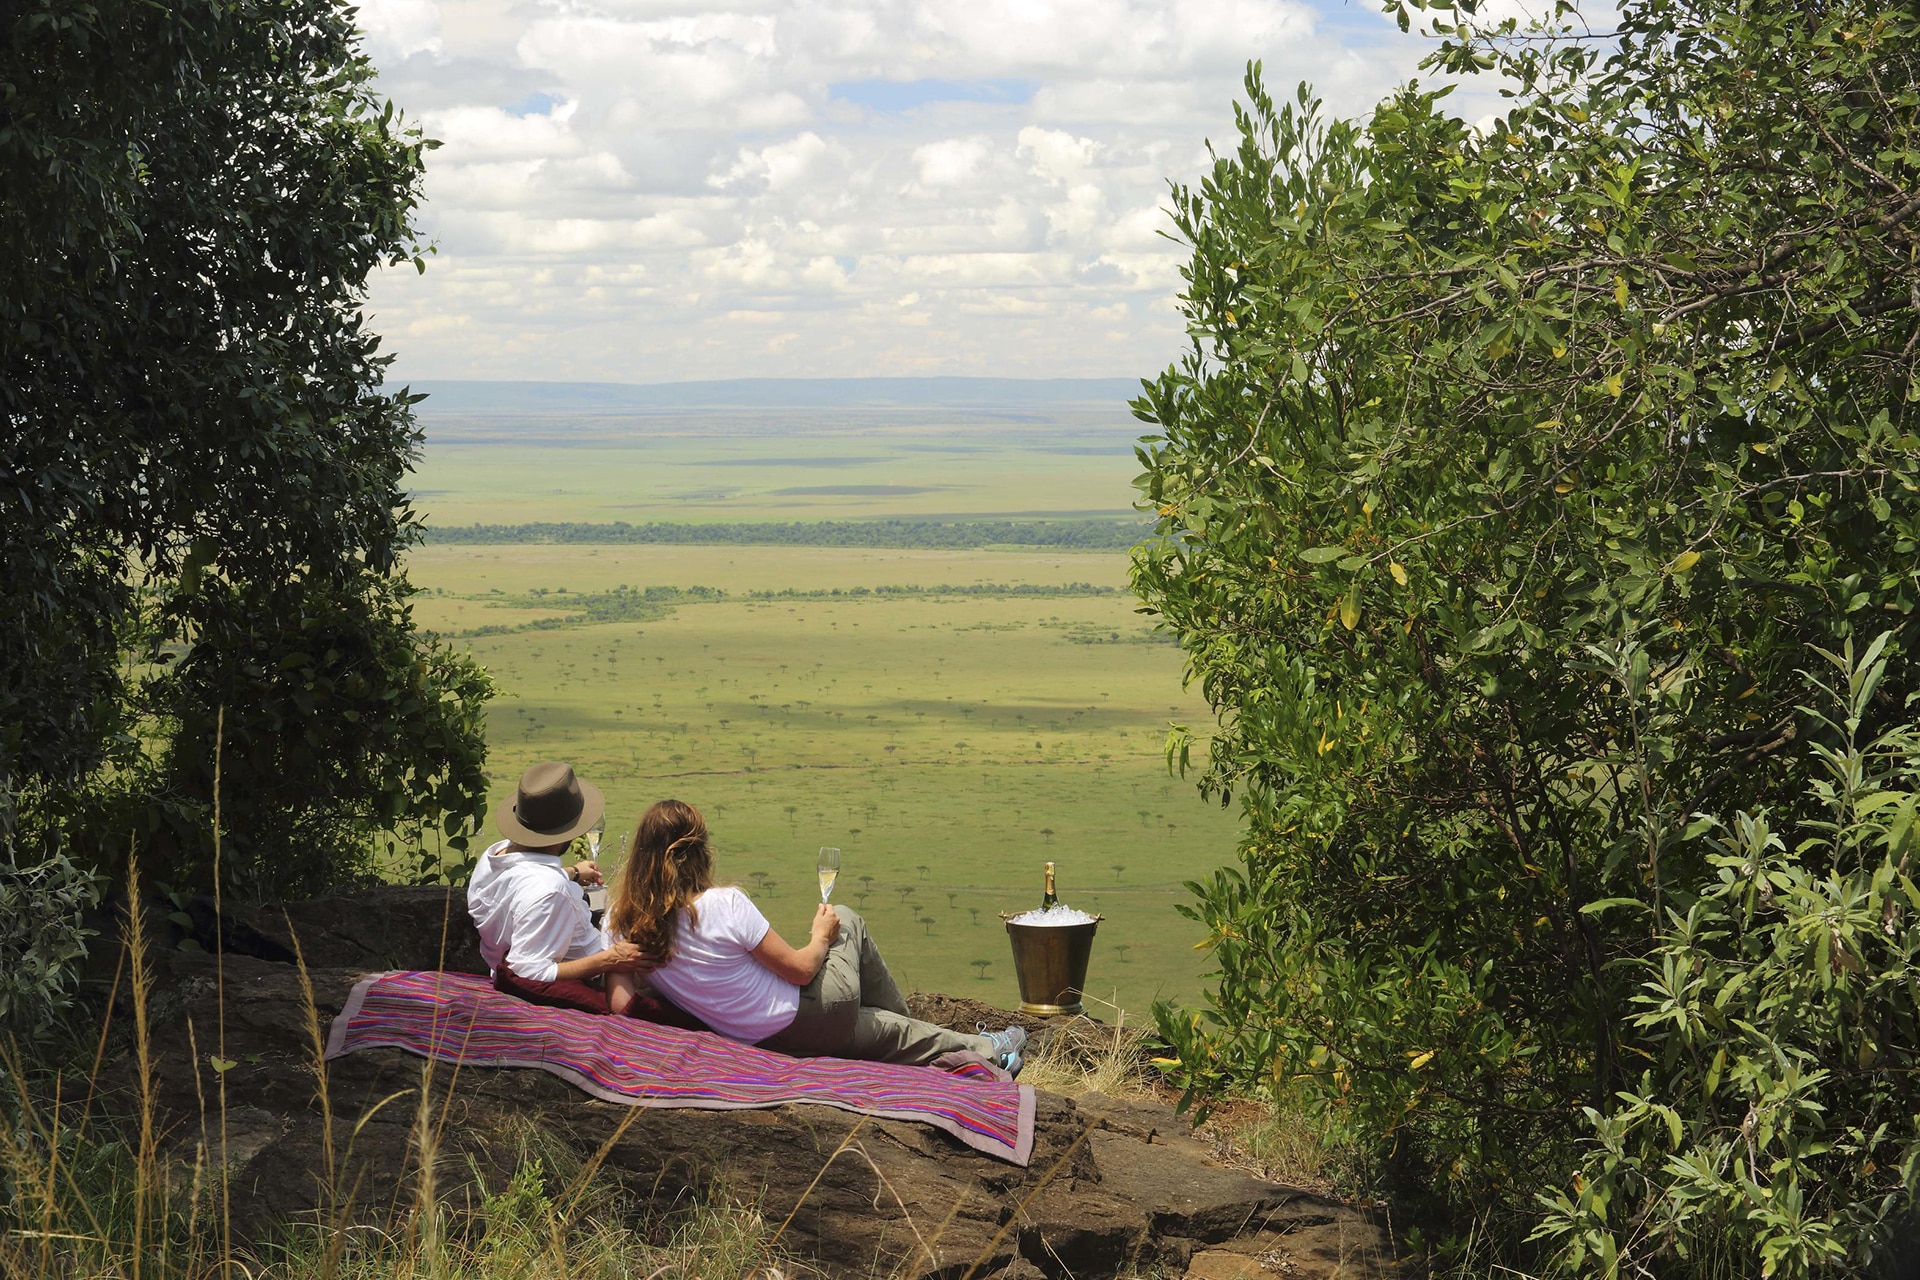 A couple having a picnic in the Maasai Mara – a recommended destination for honeymoons in Africa.